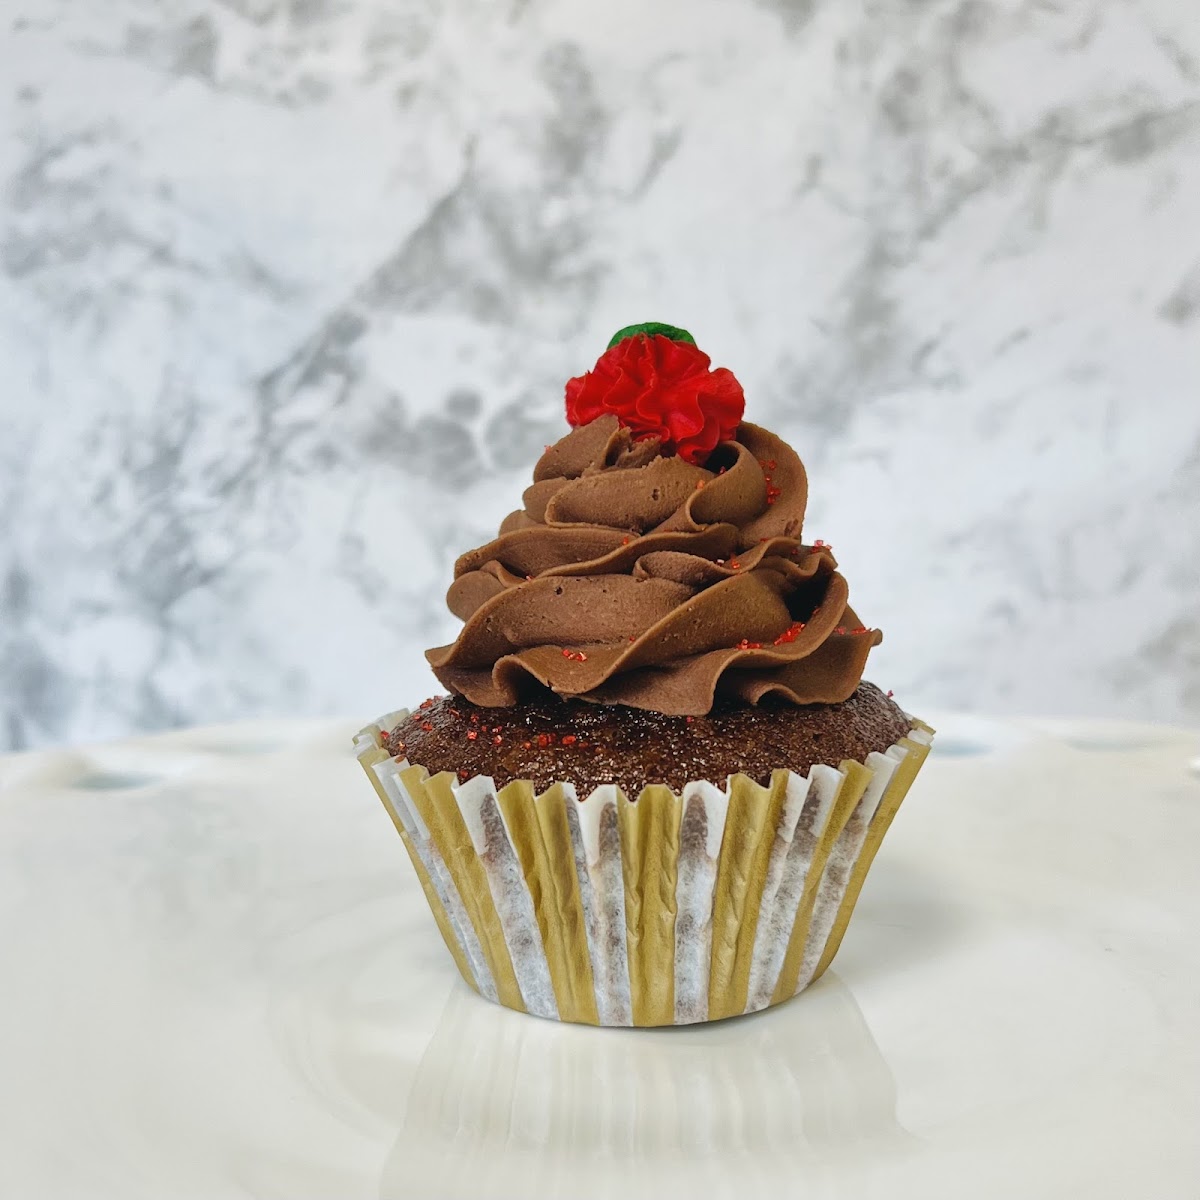 We're fired up over our new Chili Chocolate Cupcake! It's gluten free (of course!) as well as dairy free.